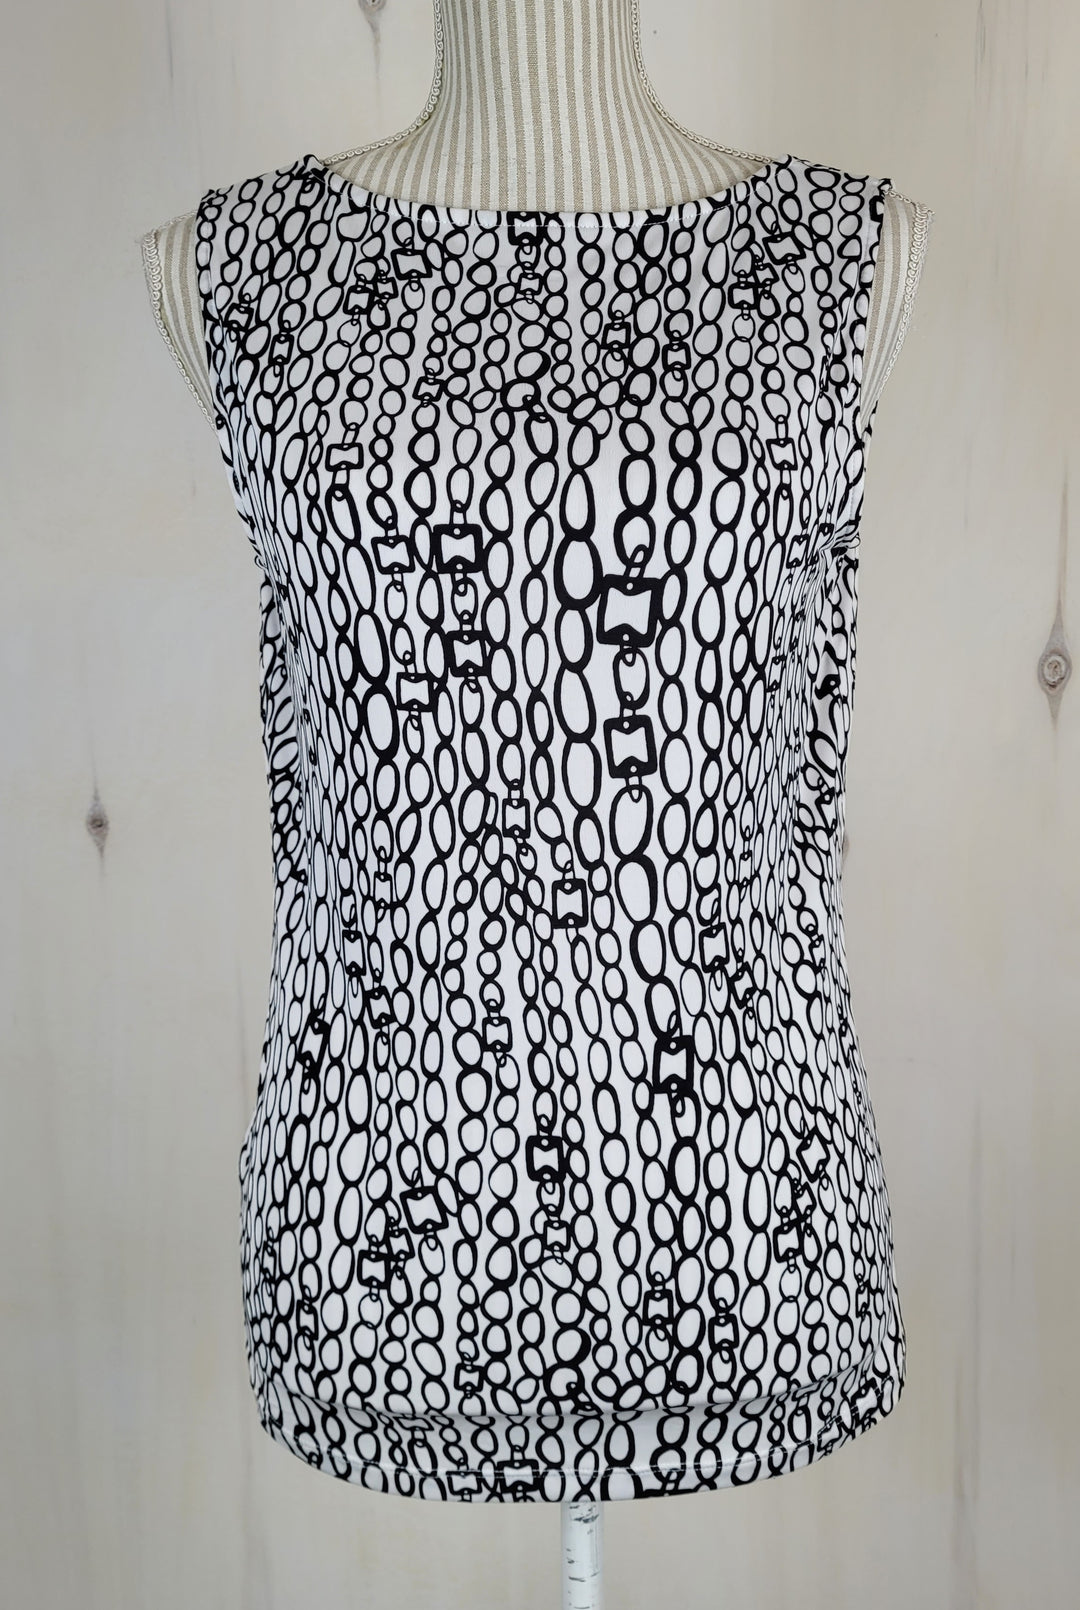 CLEO BLACK AND WHITE CHAIN BLOUSE LADIES SMALL EUC